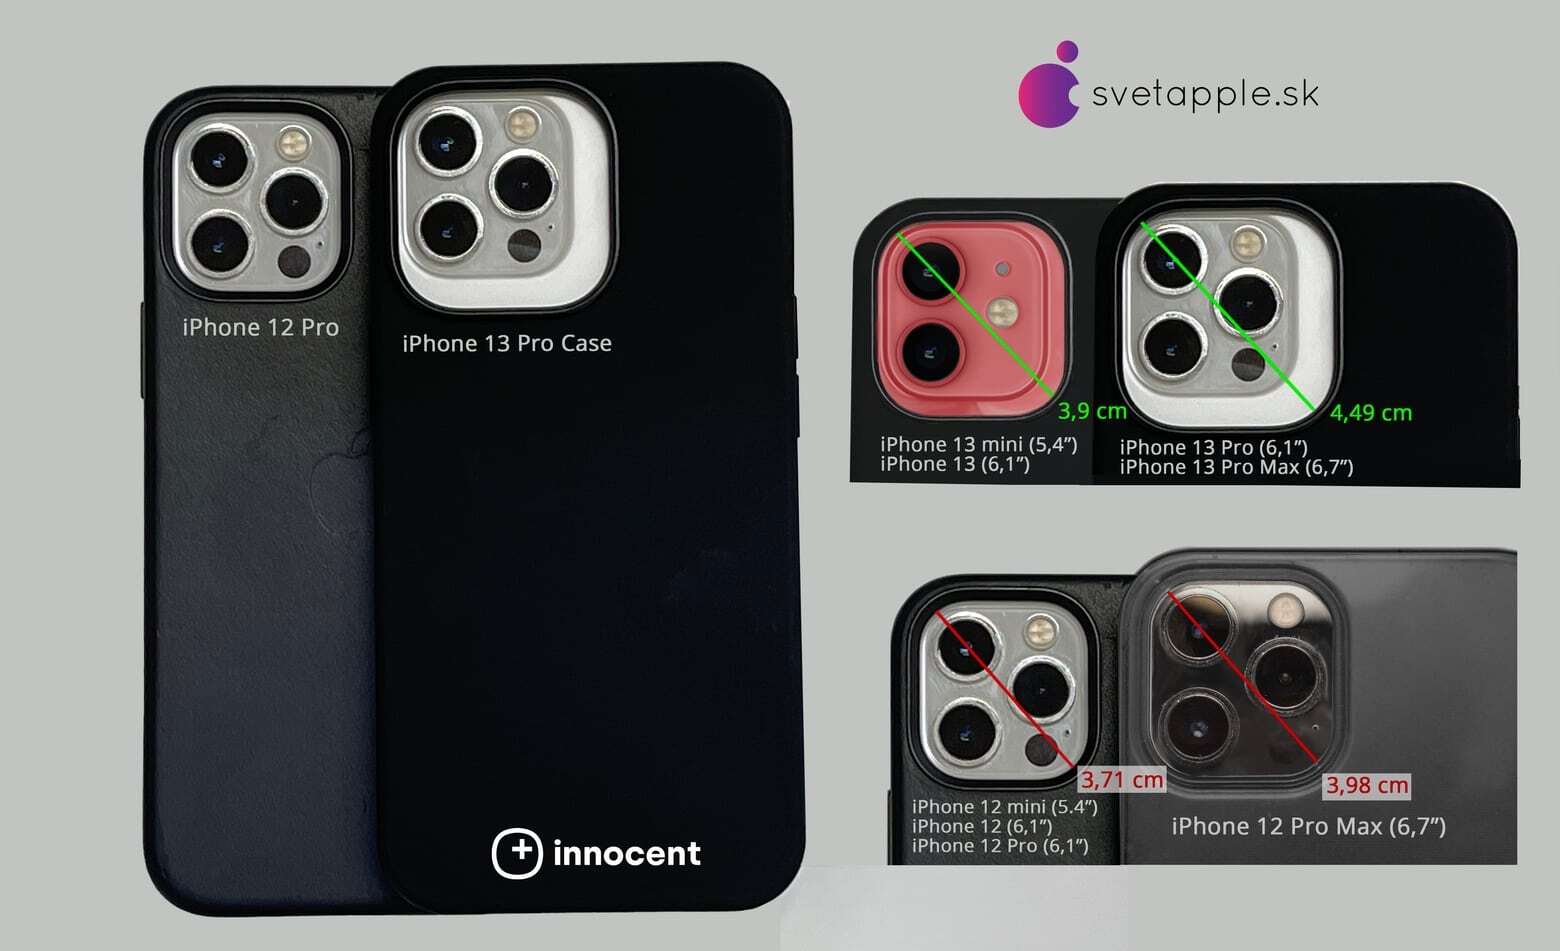 Case shows larger camera module for the 2021 iPhone models - Pictures of alleged 5G iPhone 13 Pro case reveal larger camera module, thicker body and more